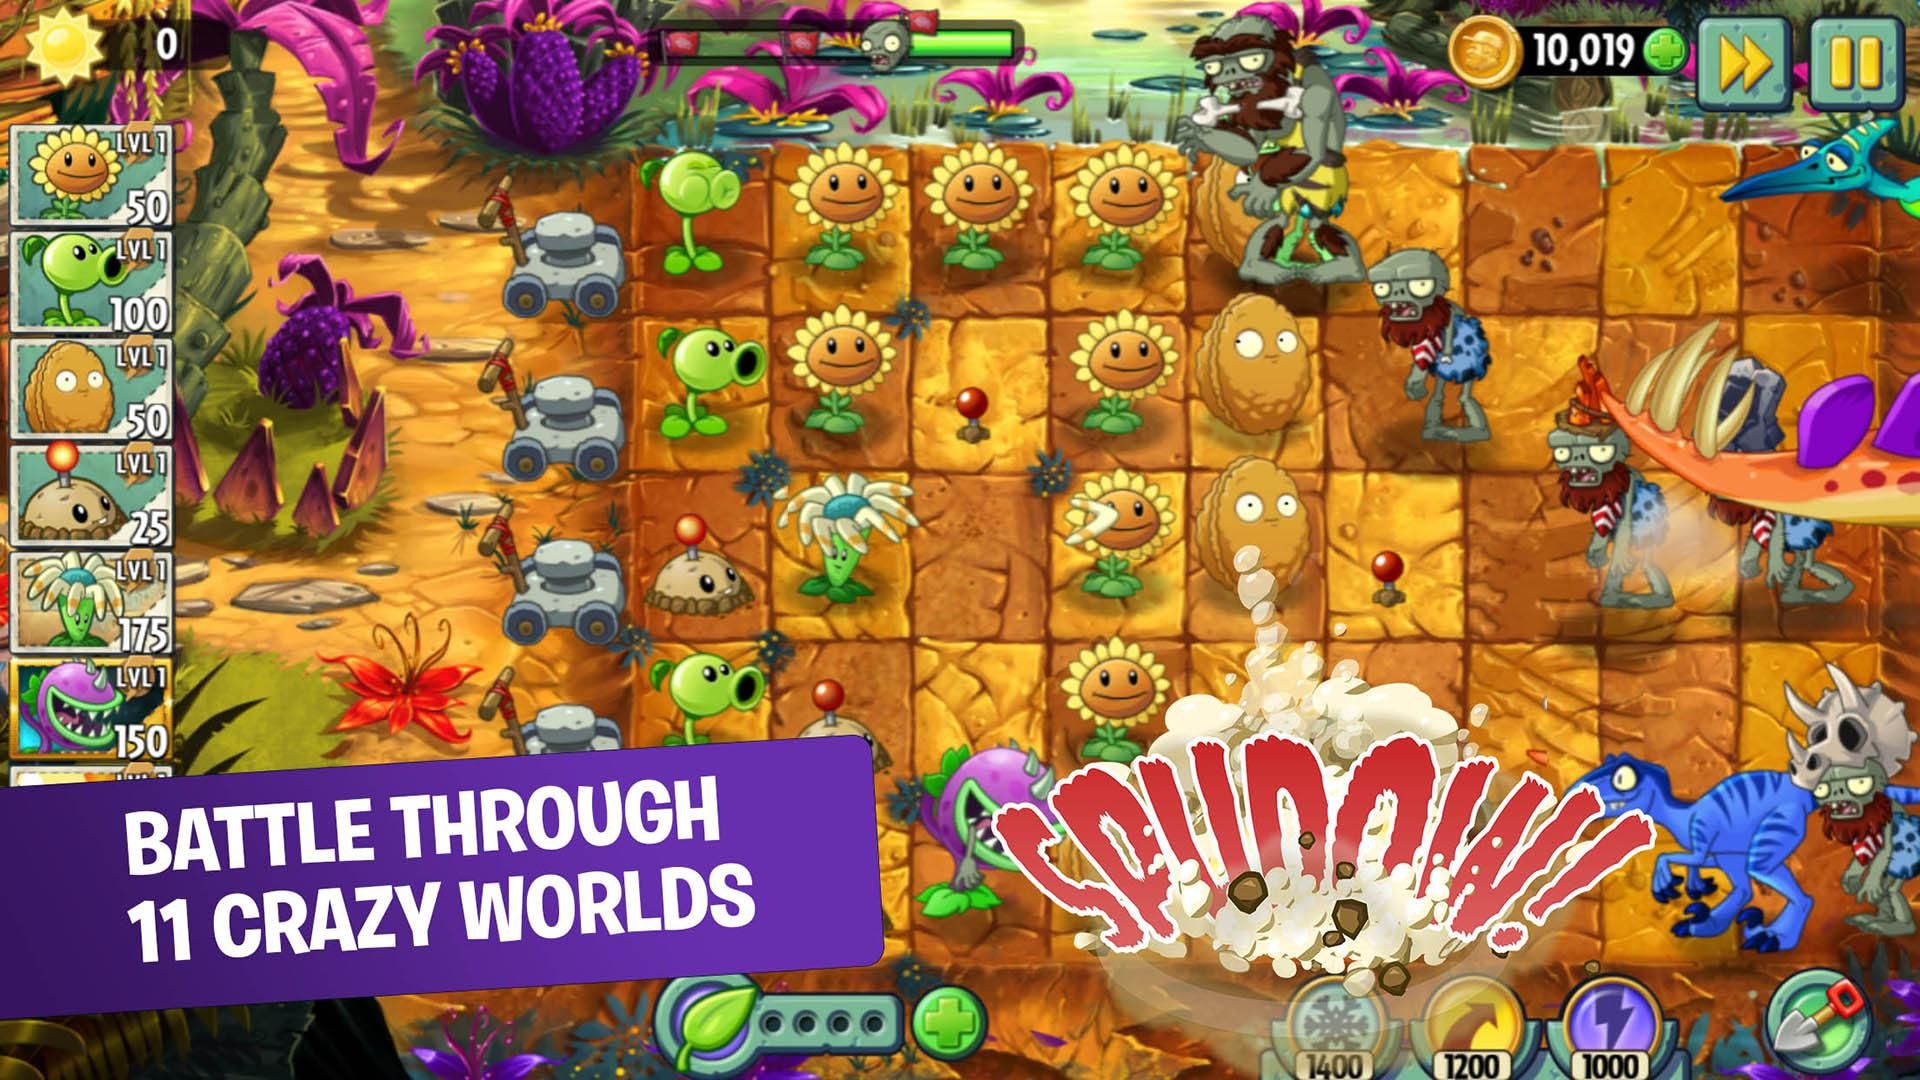 Battle through 11 crazy worlds in Plants vs Zombies 2